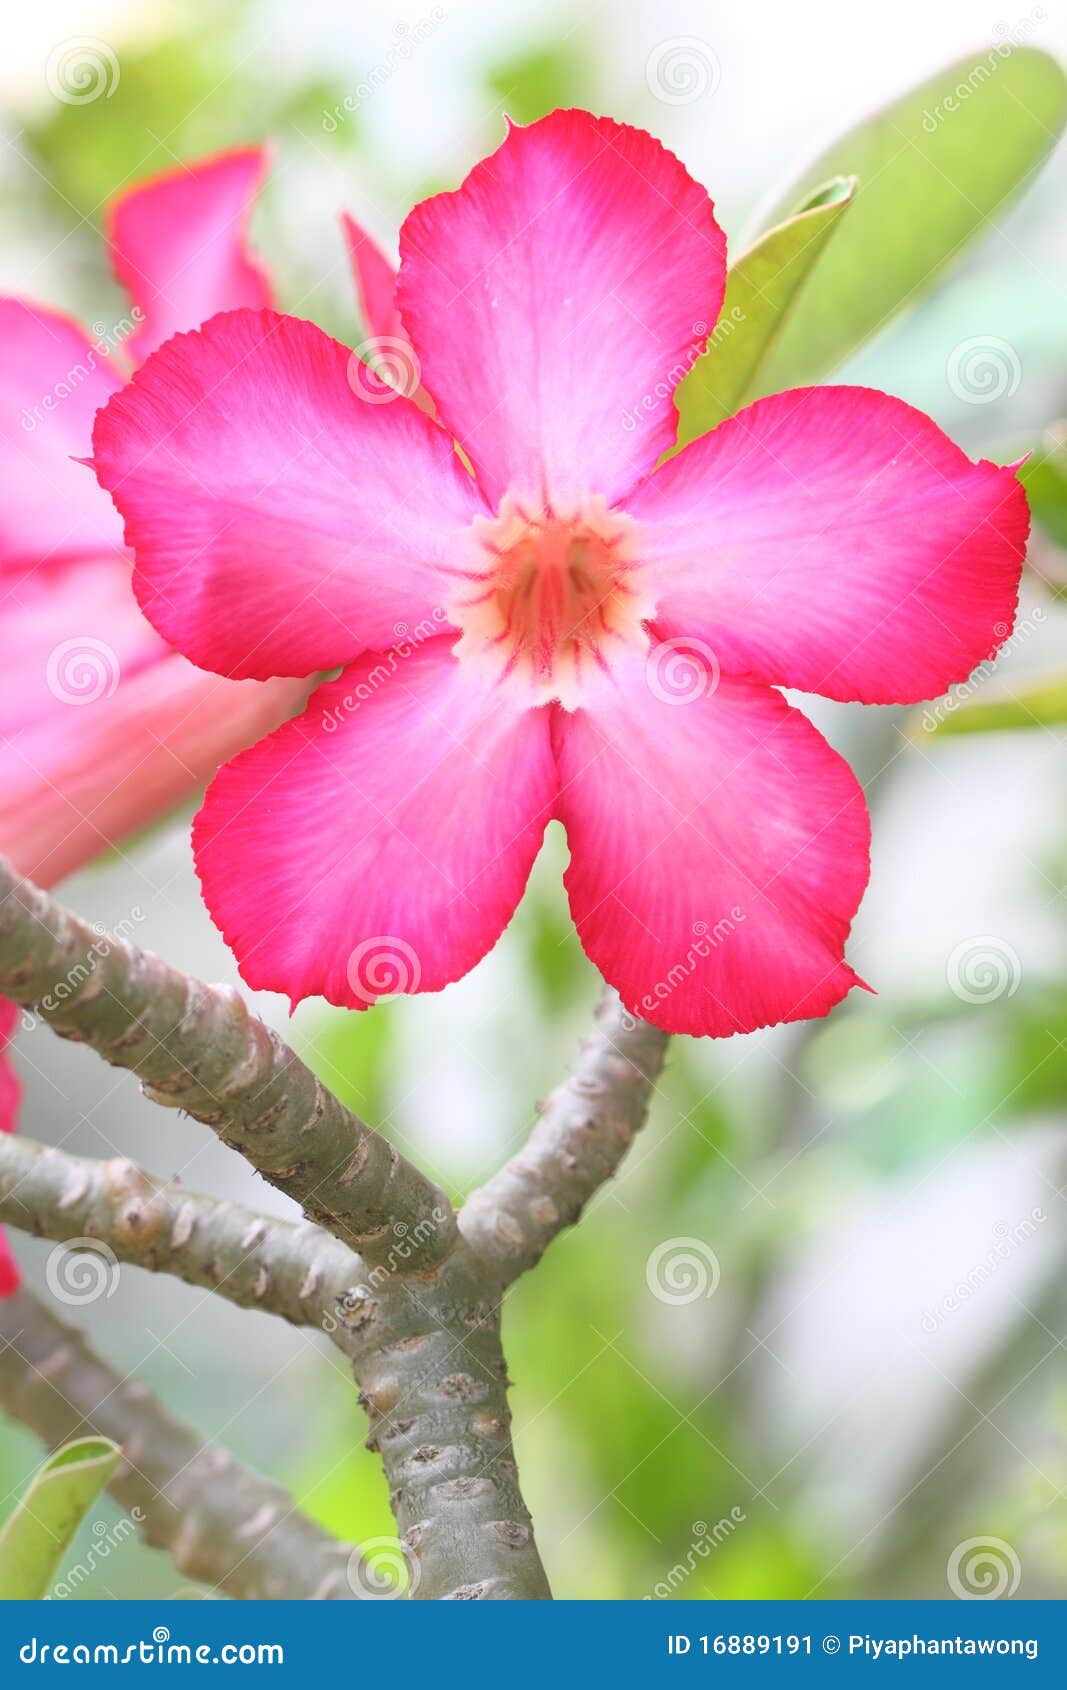 Desert RoseTropical Flower In Garden Stock Photo, Picture and Royalty Free  Image. Image 17577201.